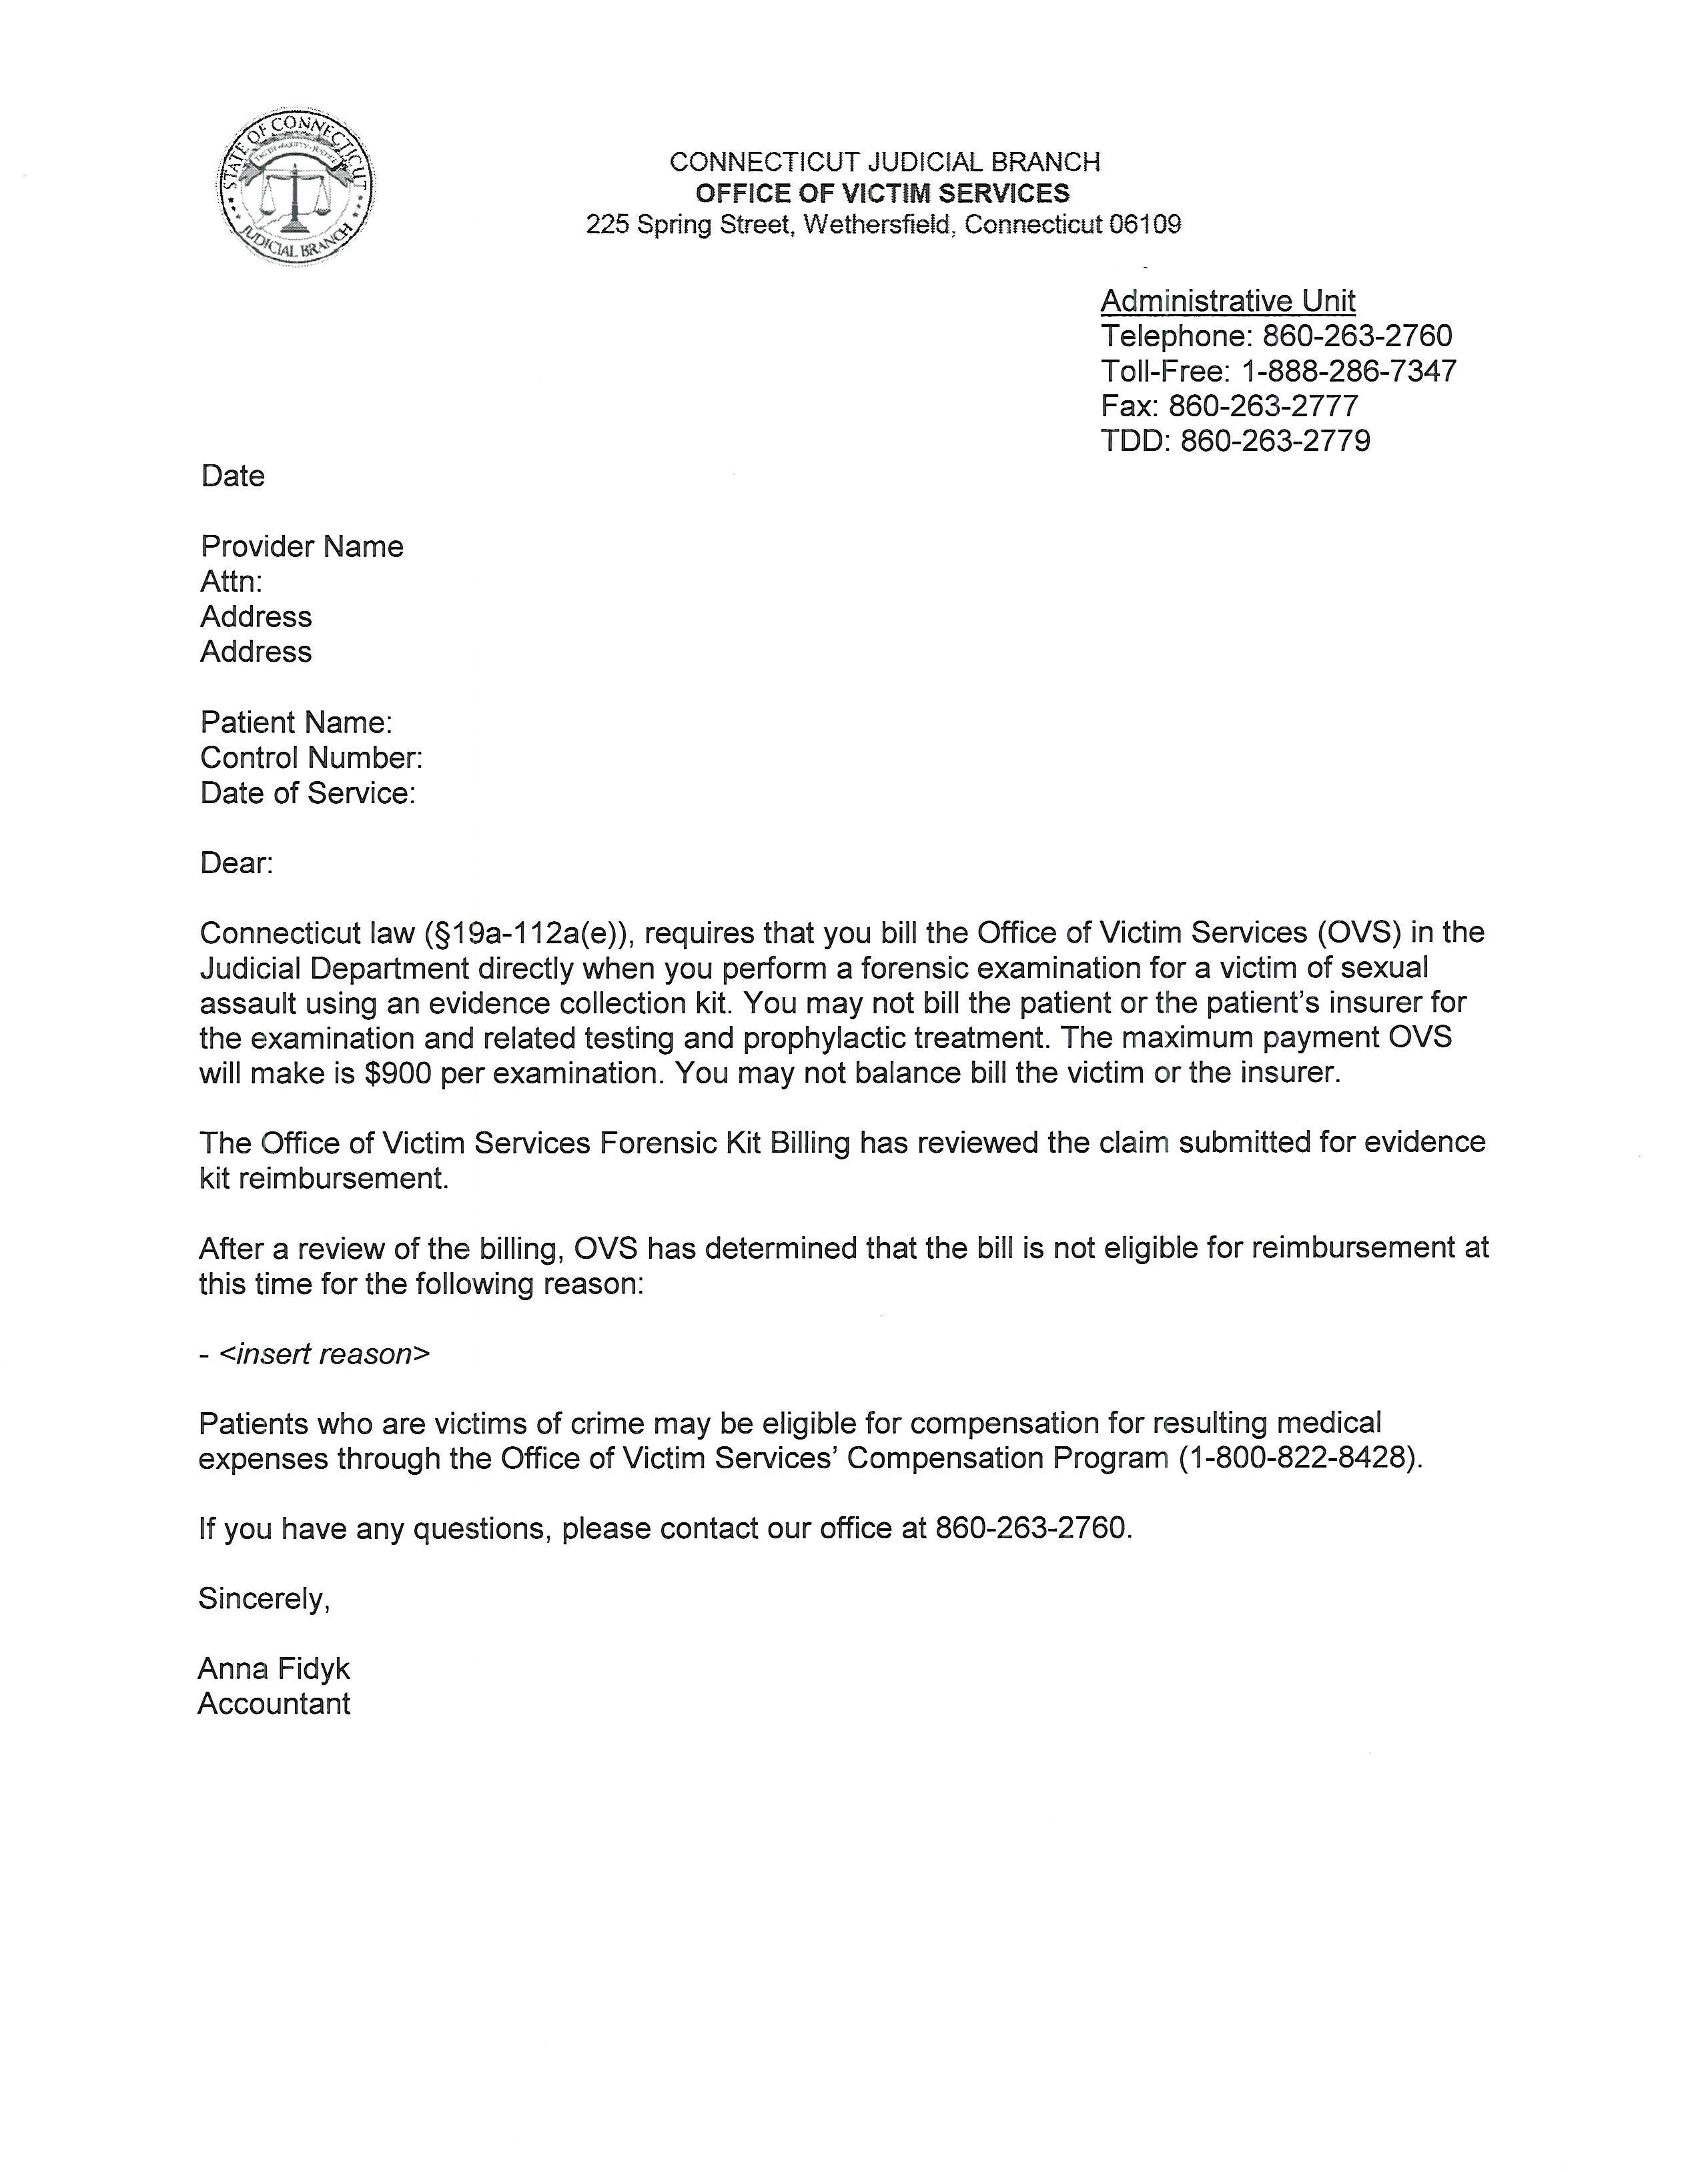 Office of Victim Services: Billing Letter to Provider